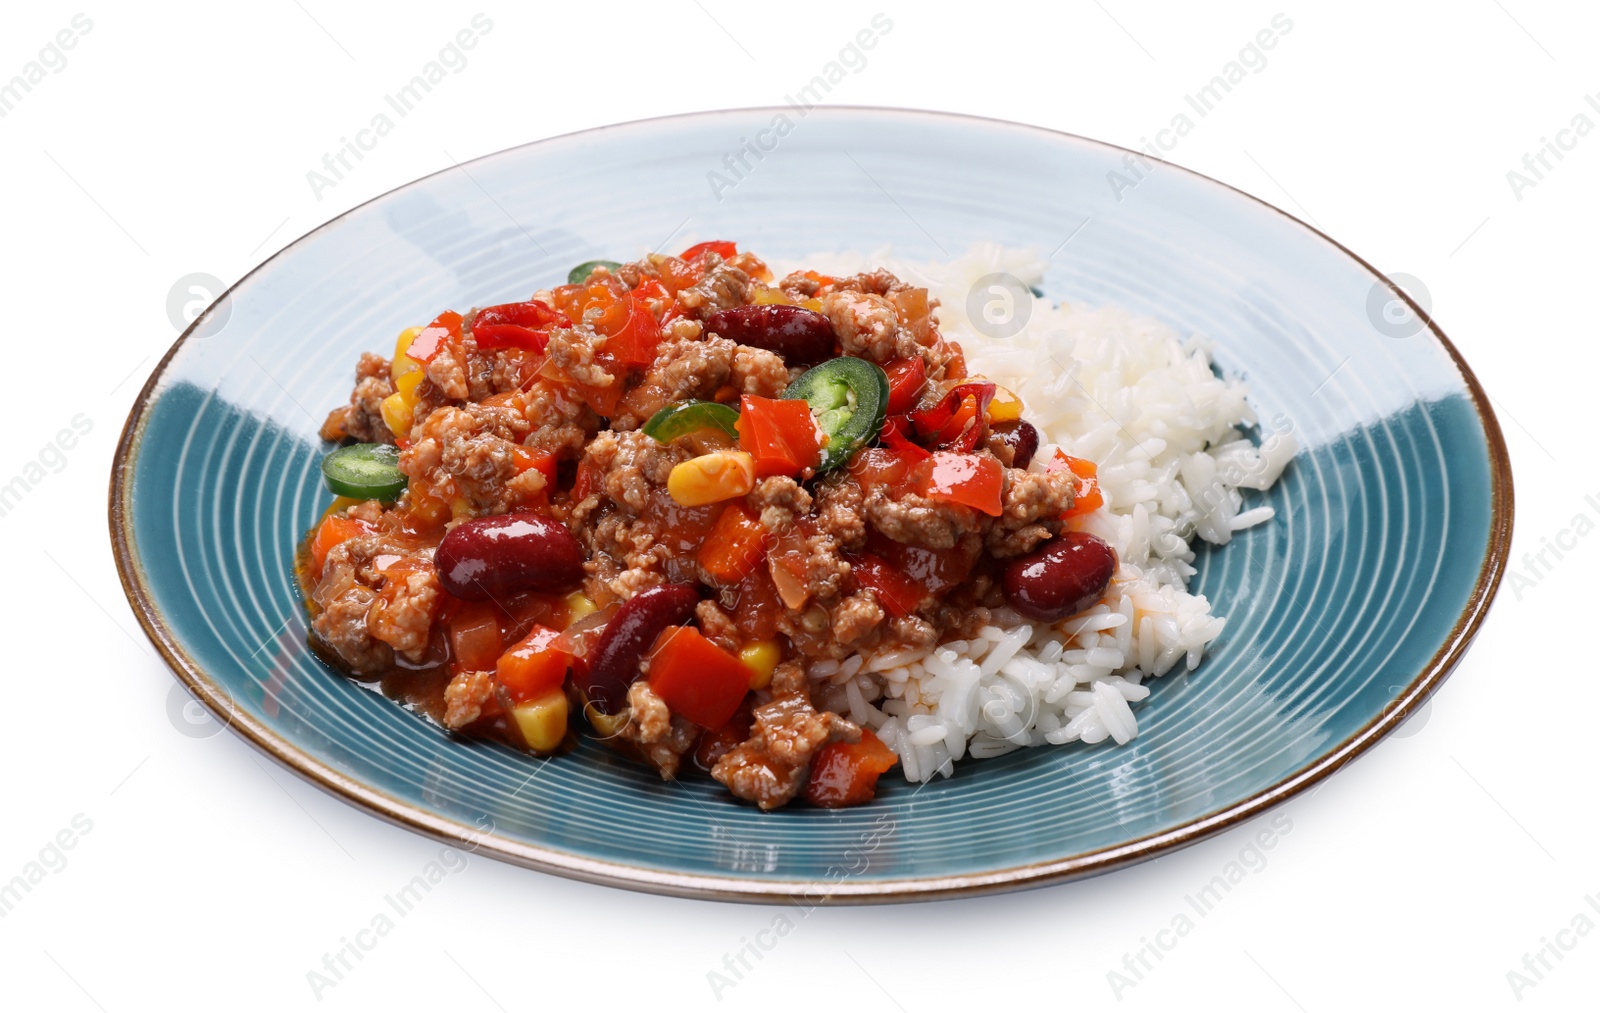 Photo of Plate of rice with chili con carne on white background